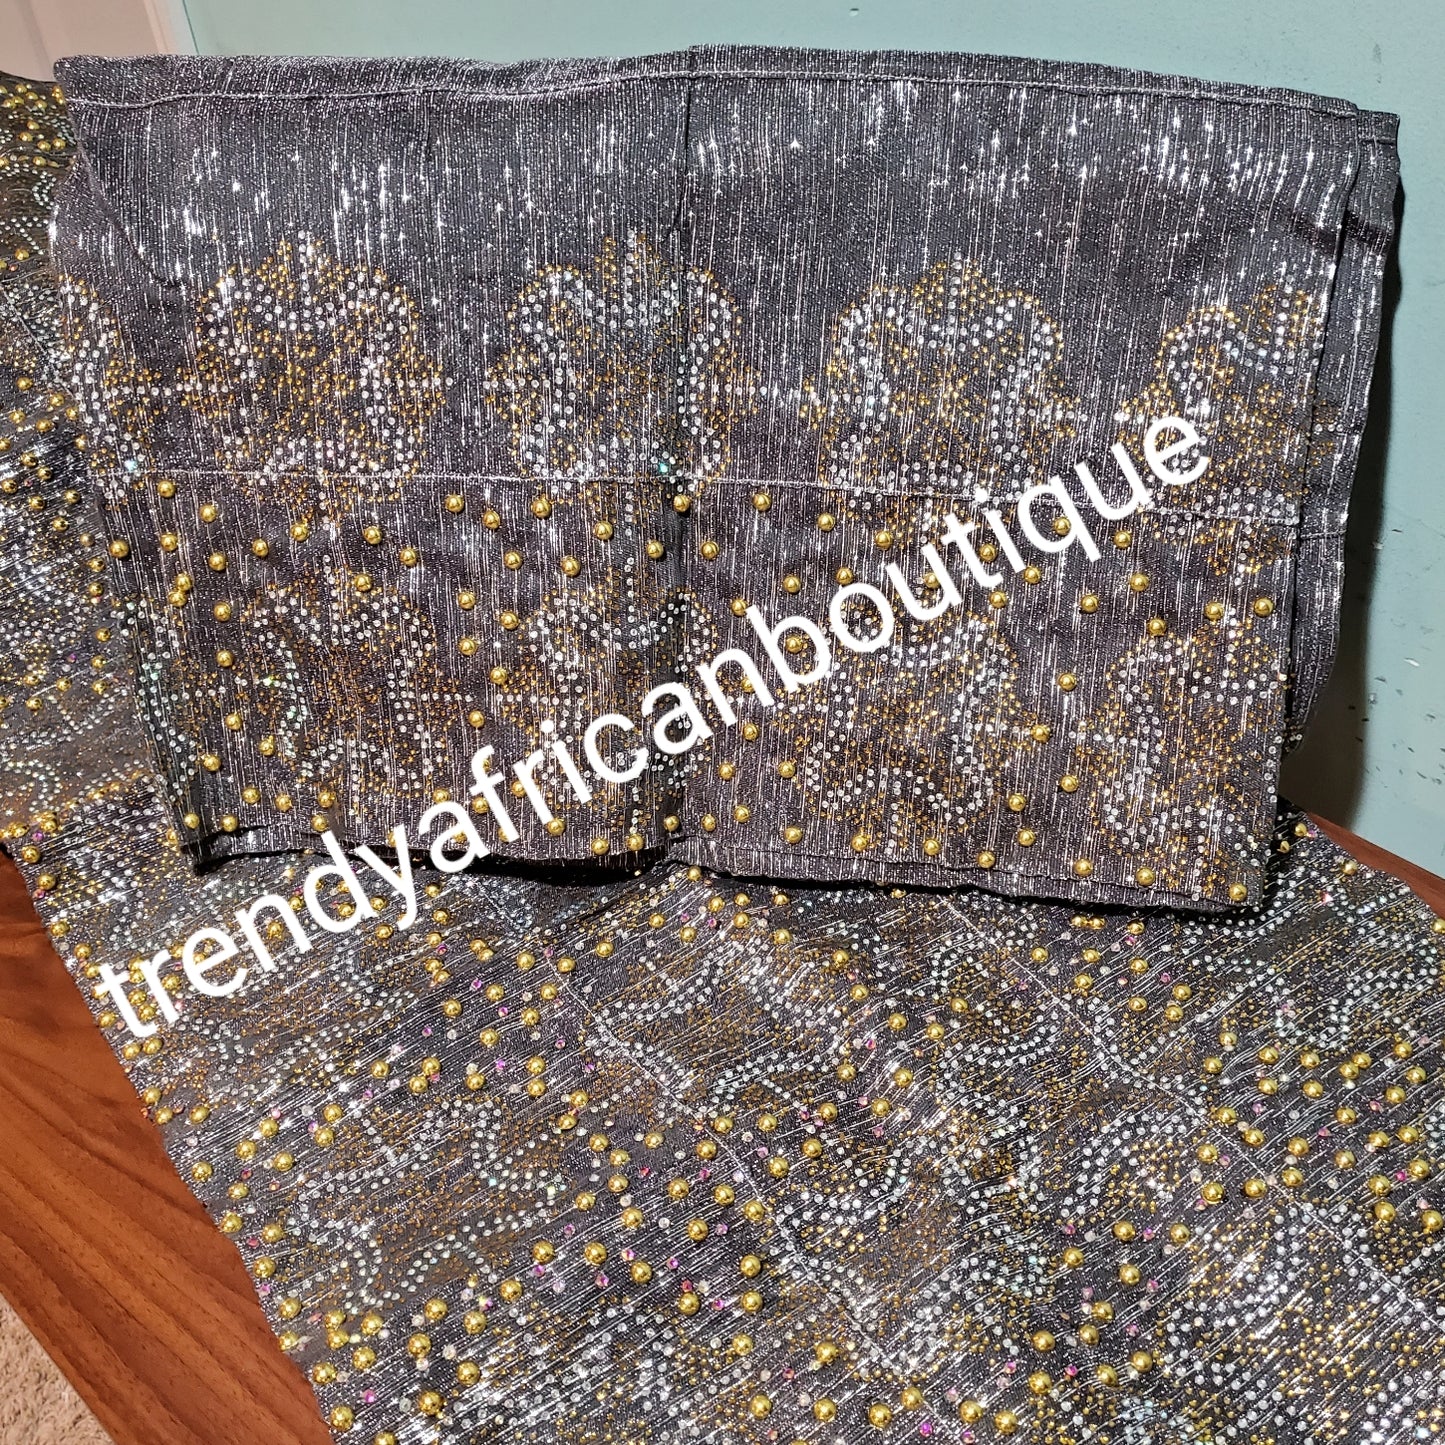 New arrival Gray/silver Beaddazzled Aso-oke  gele/ipele set. 4pc wide Gele with 90" long Ipele (shoulder shawl).. Price is for set.  Celebrant Aso-oke set from Nigeria. All over Swarovski stone work for special occasion